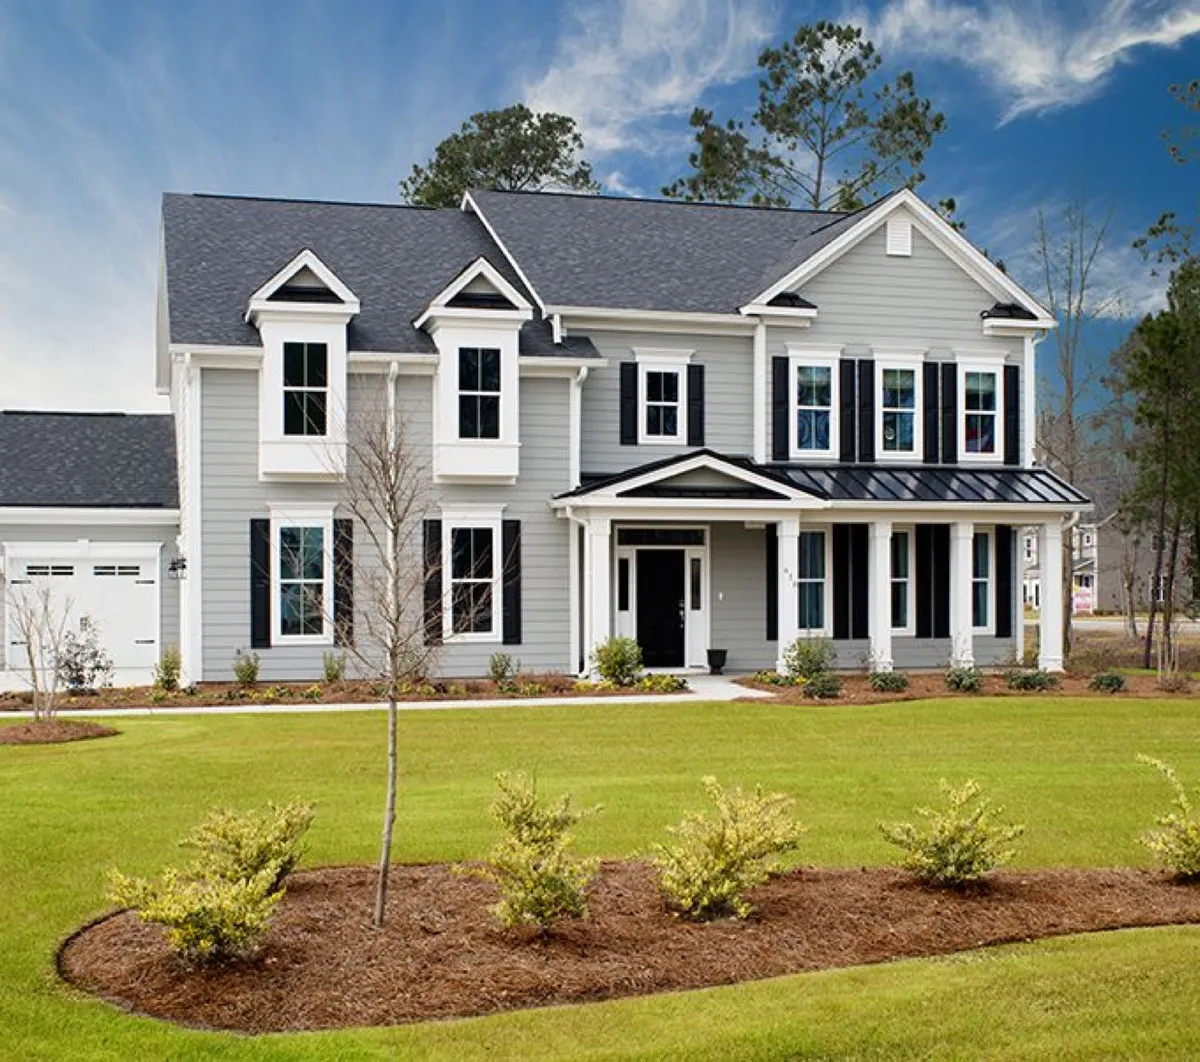 New construction two-story home with large lawn